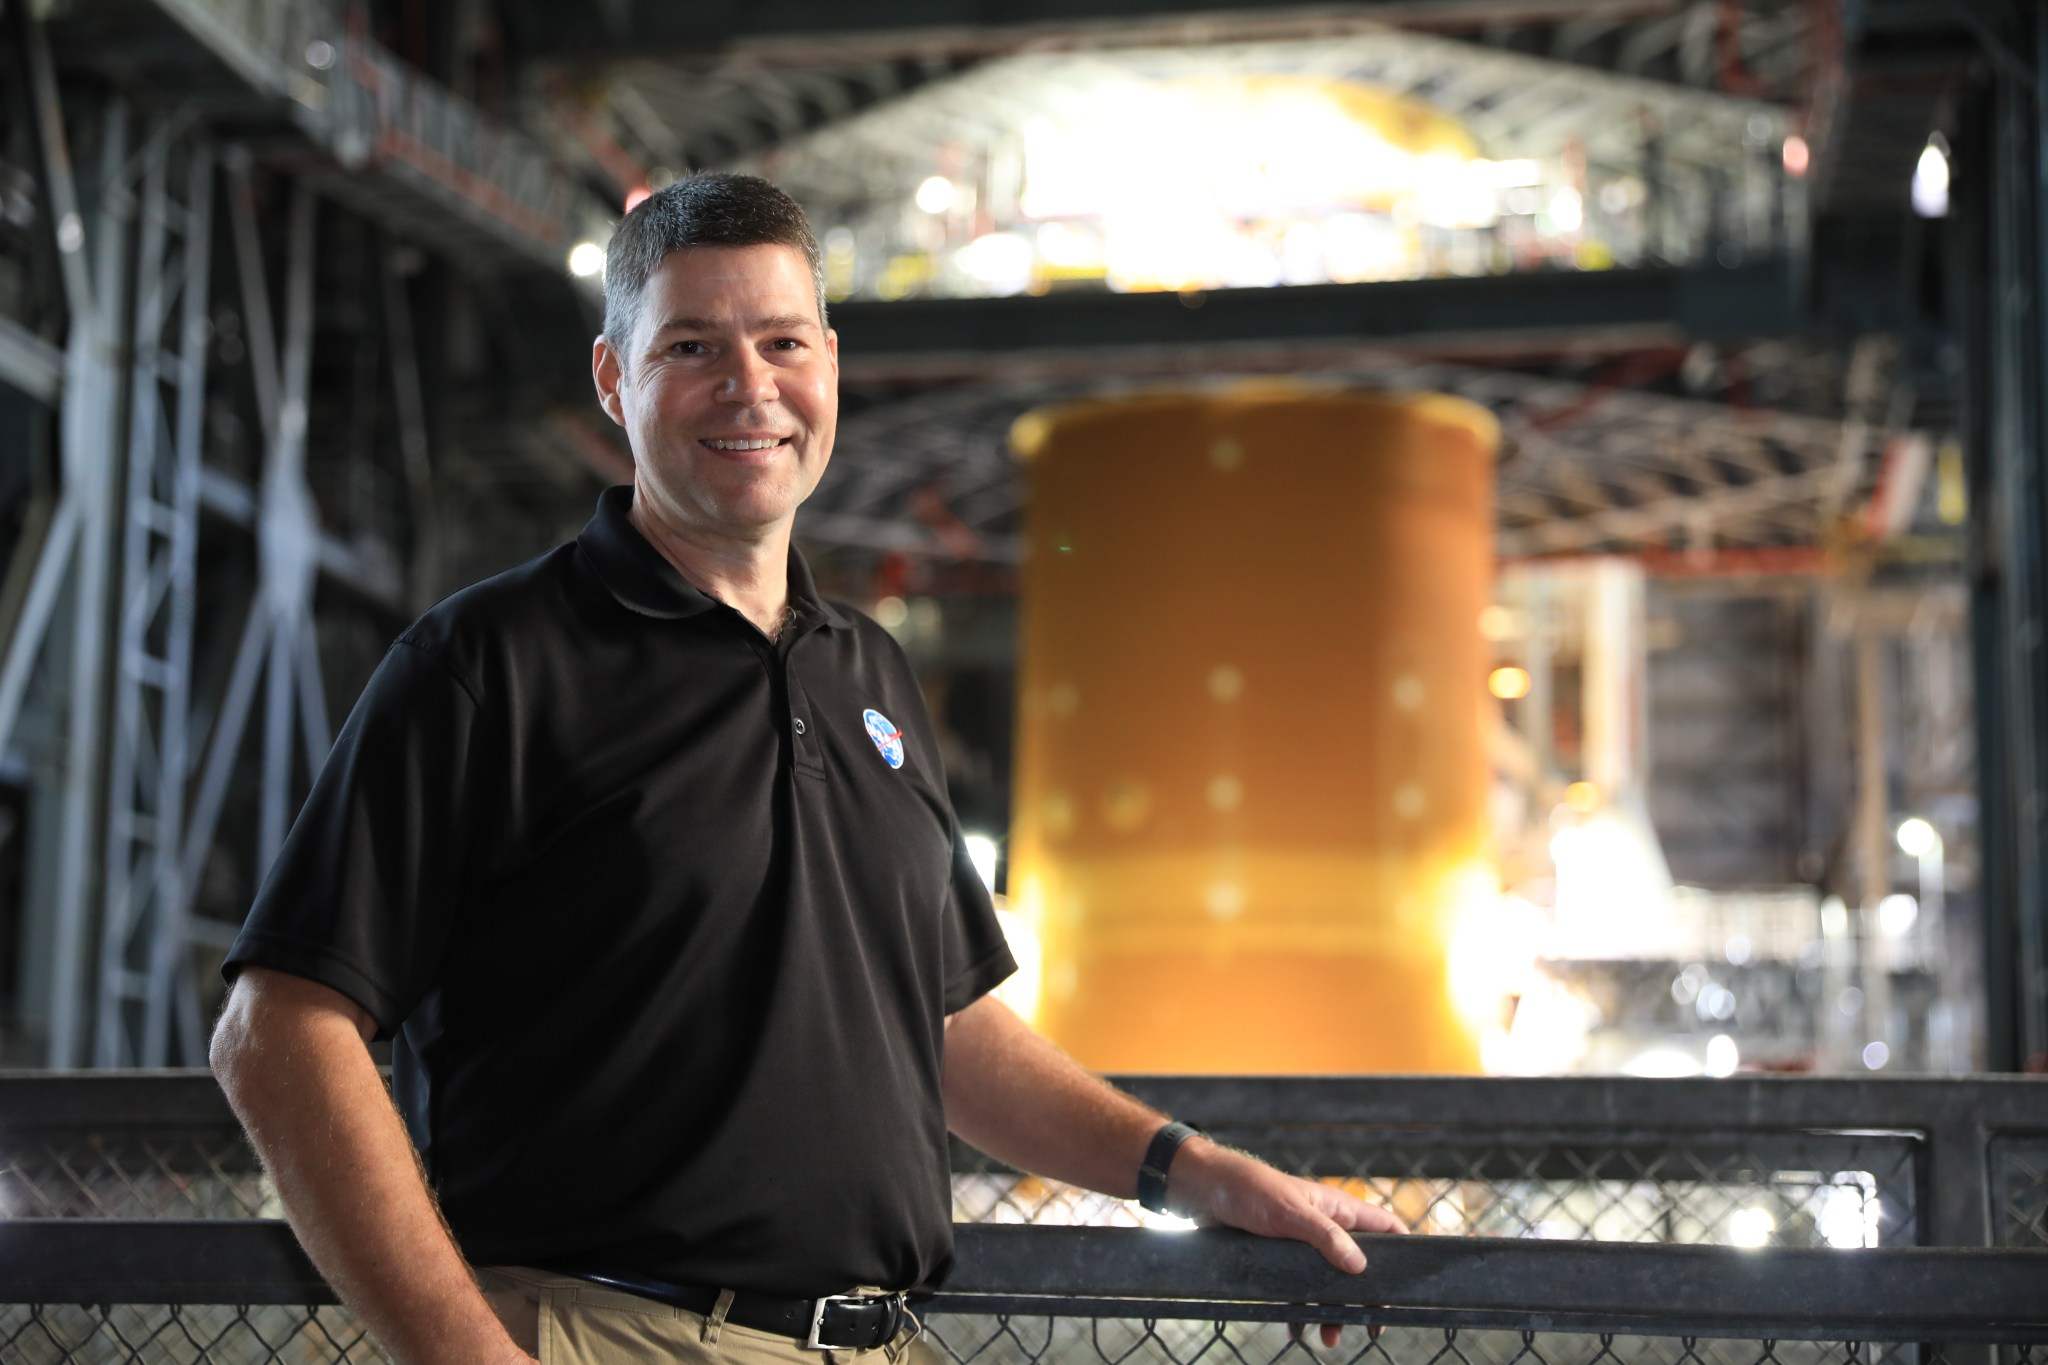 NASA’s Dr. John Blevins has worked in the spaceflight industry for over 20 years. He now helps lead the team developing the Space Launch System rocket, the first launch vehicle designed to send astronauts to deep space since the Saturn V. 